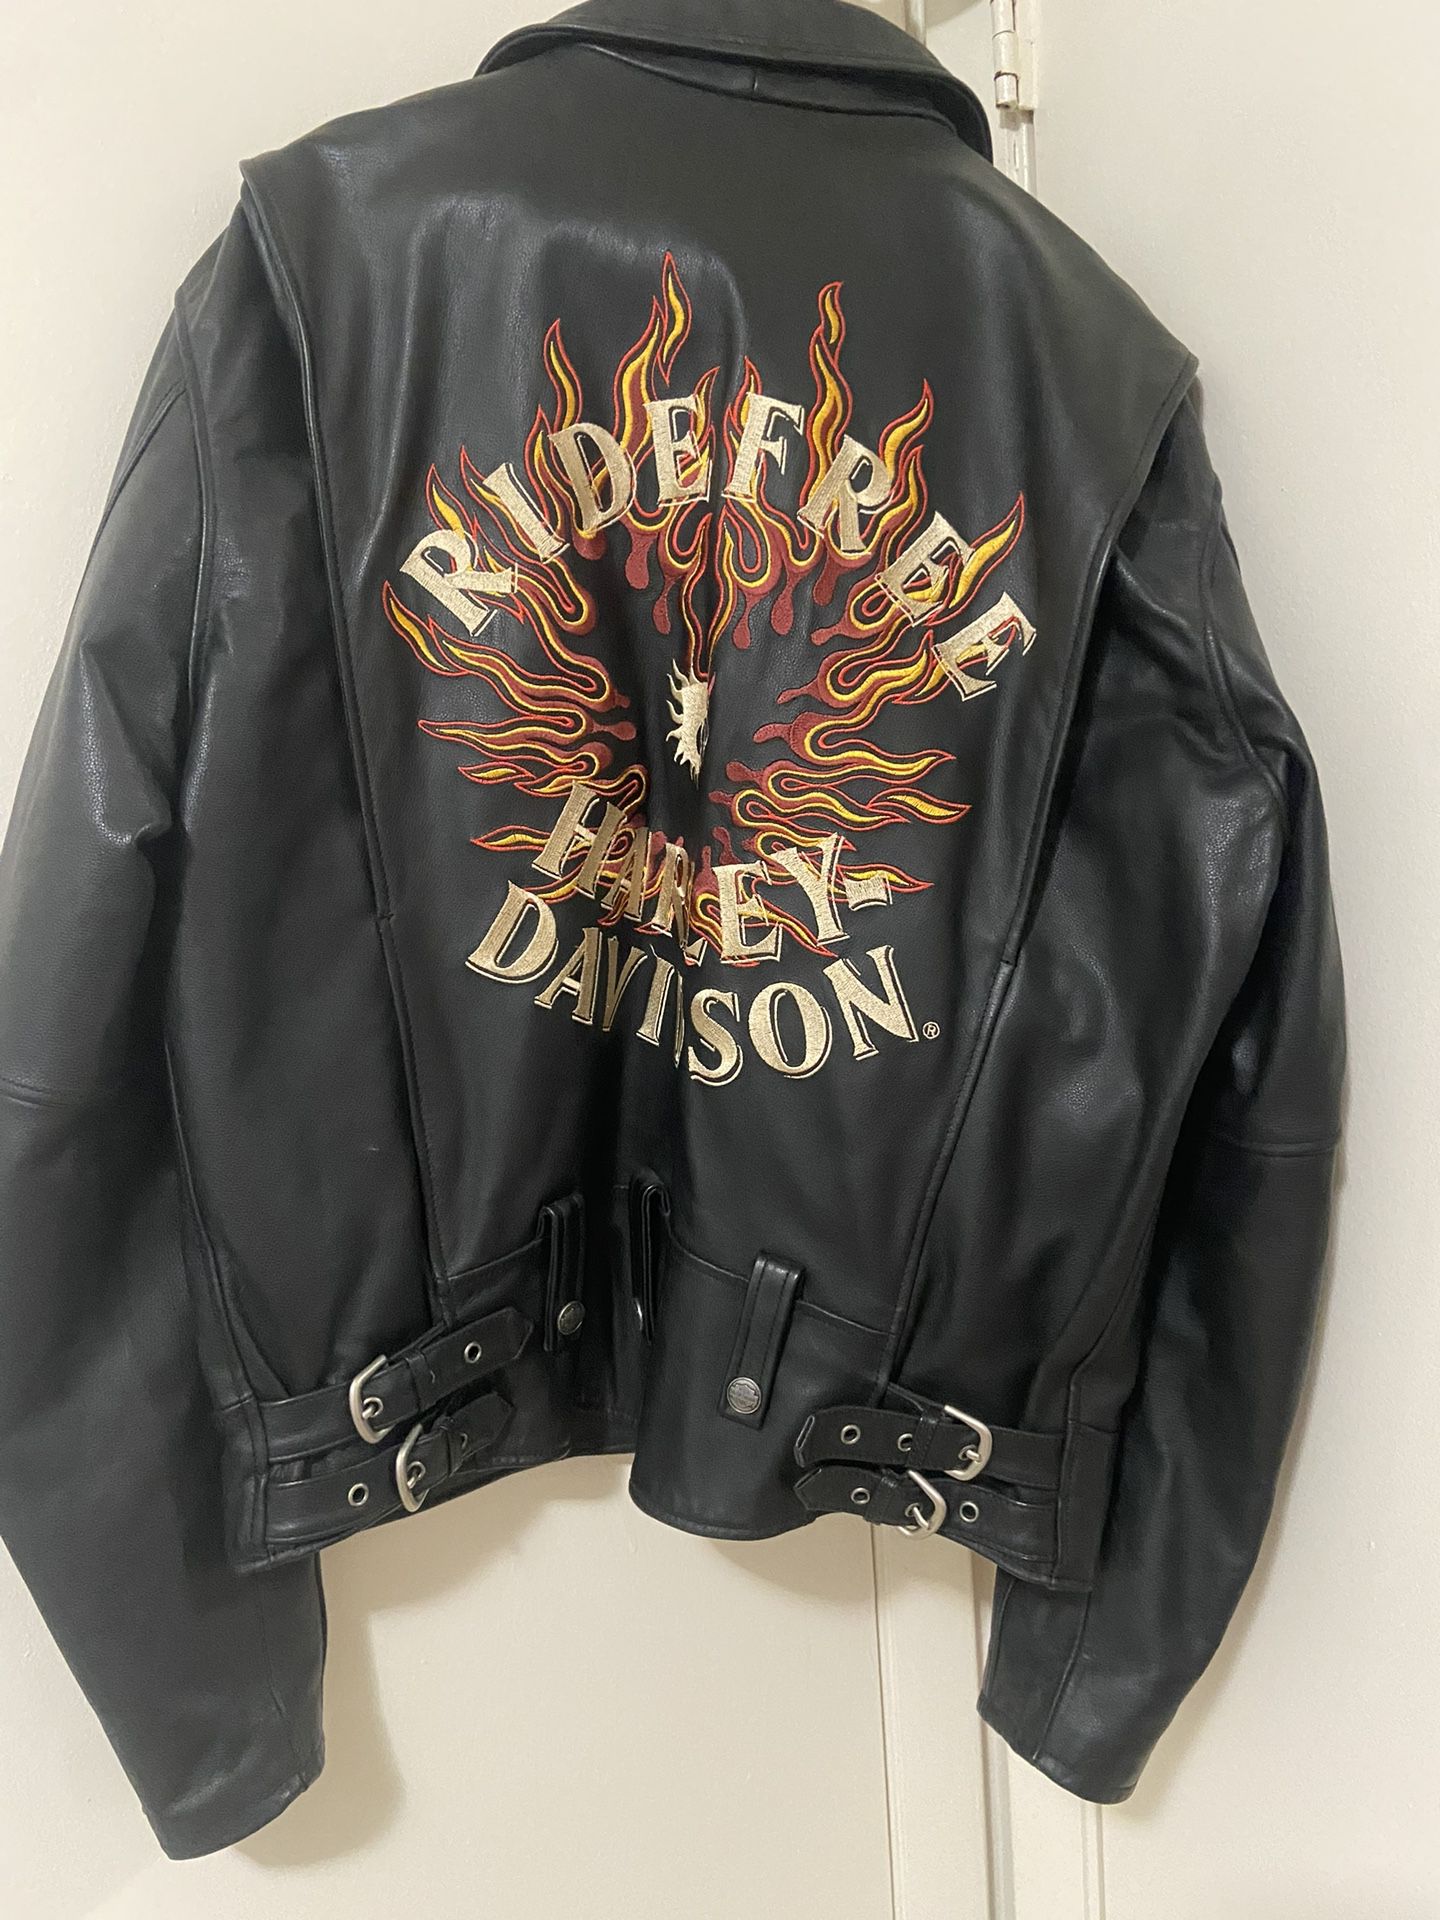 Harley Davidson Ride Free Leather Jacket w/ Embroidery Men’s Large